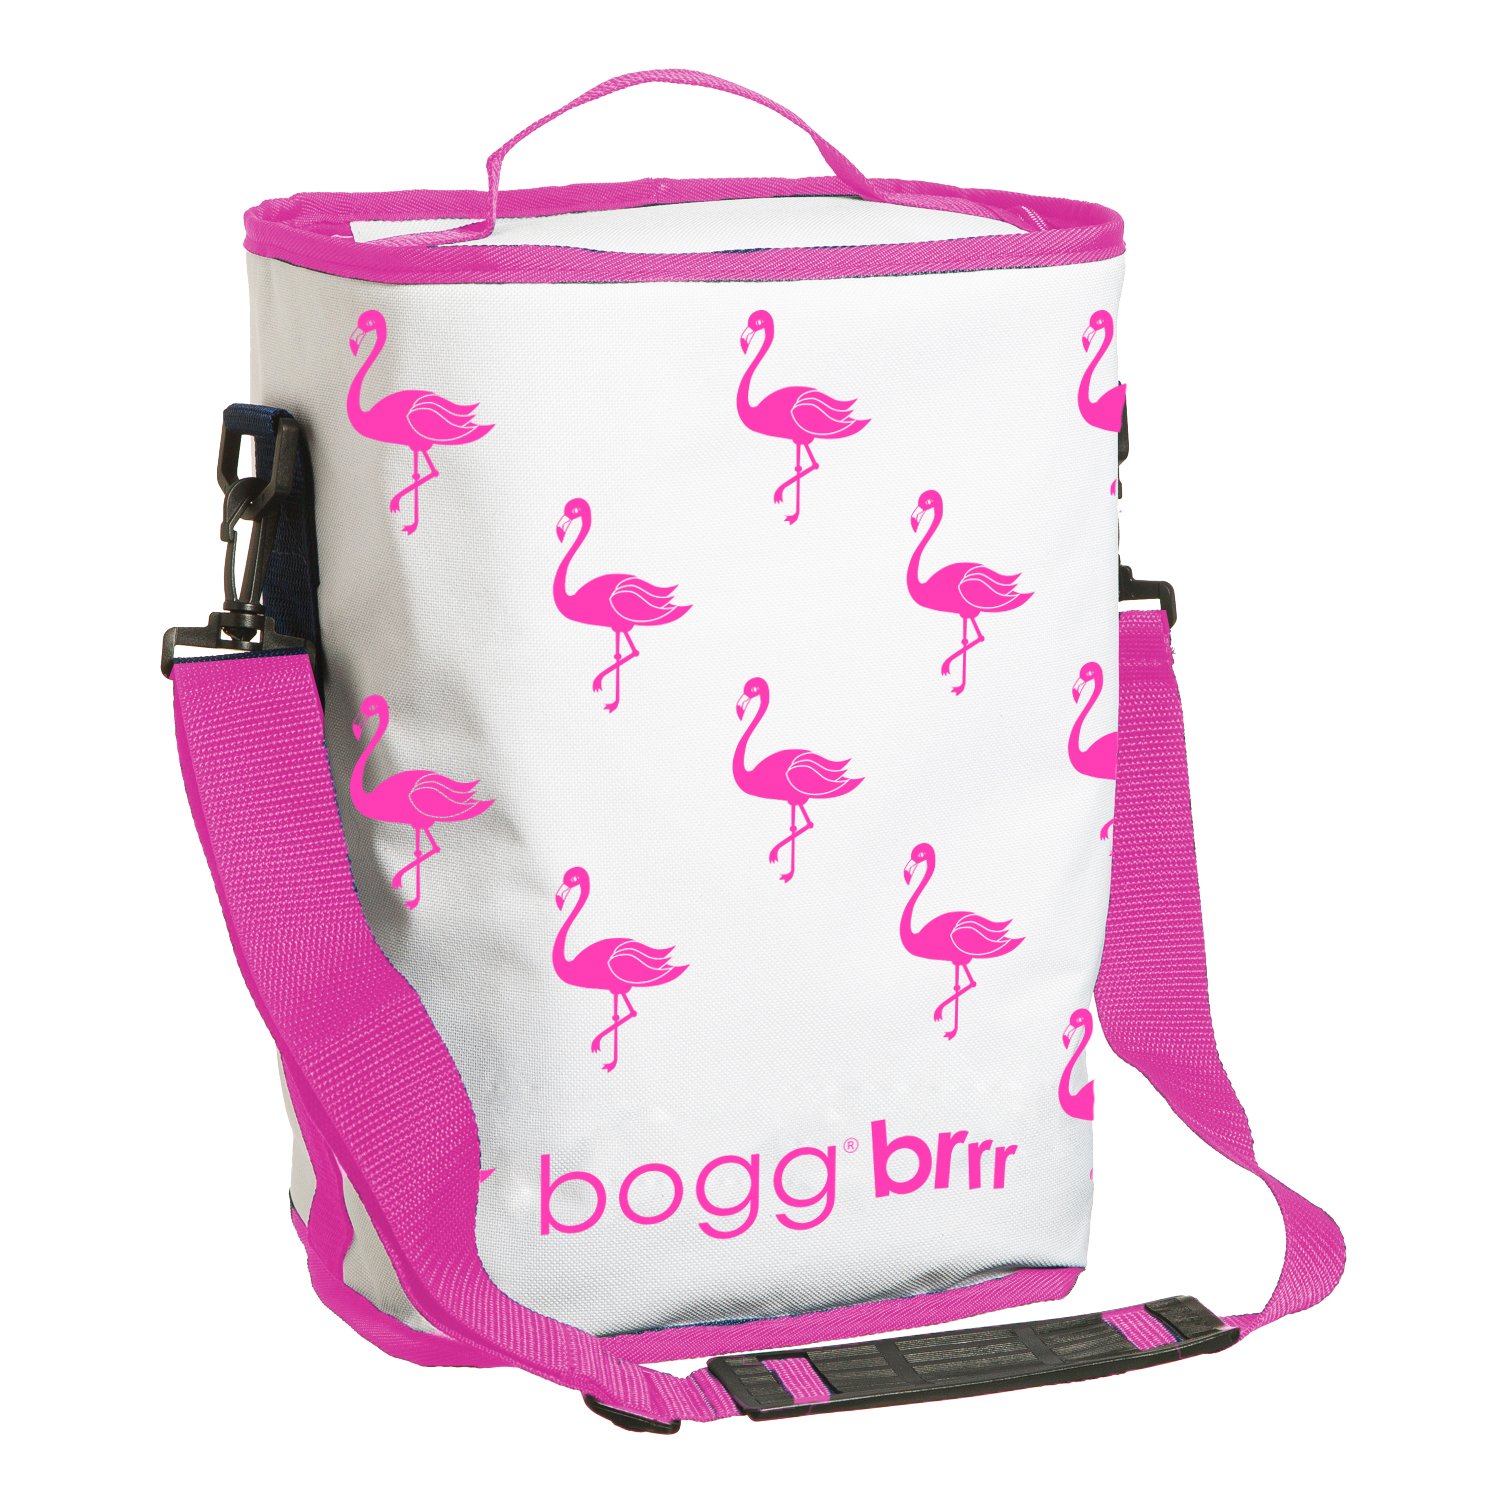 Big Bogg Bag CALL FOR AVAILABILITY – The Buttercup Charlotte